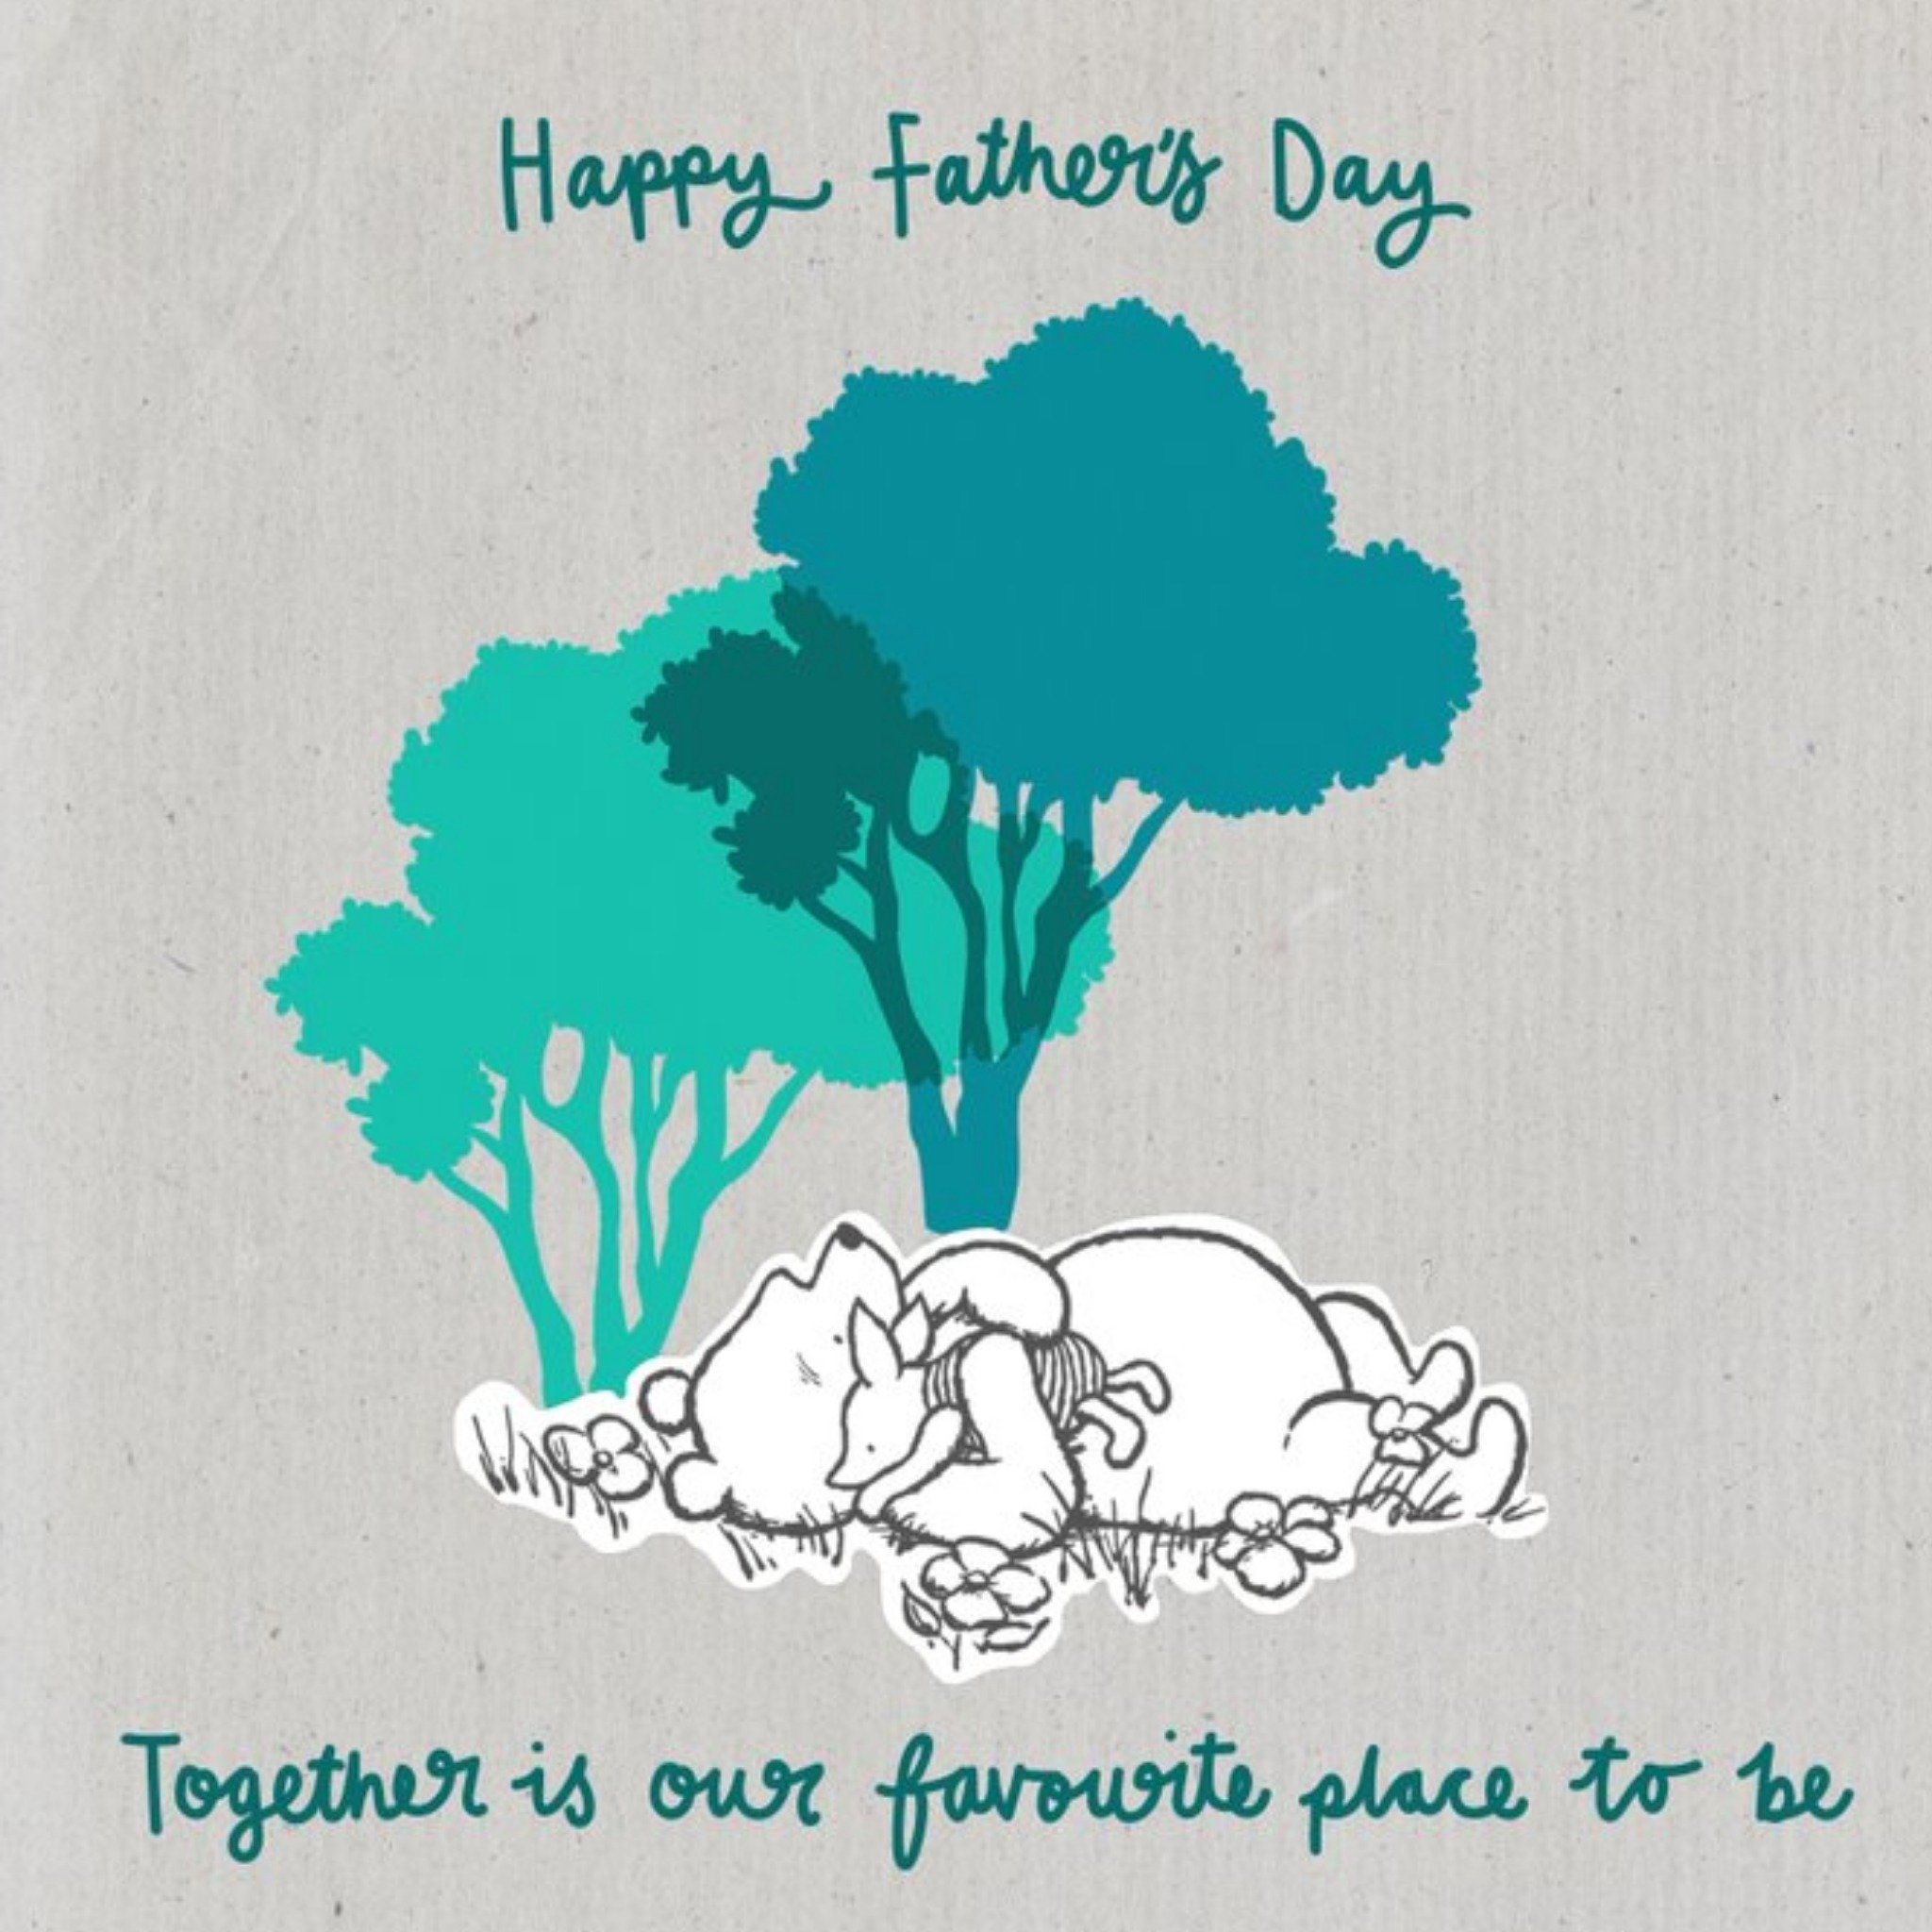 Disney Classic Pooh Happy Fathers Day Card, Square